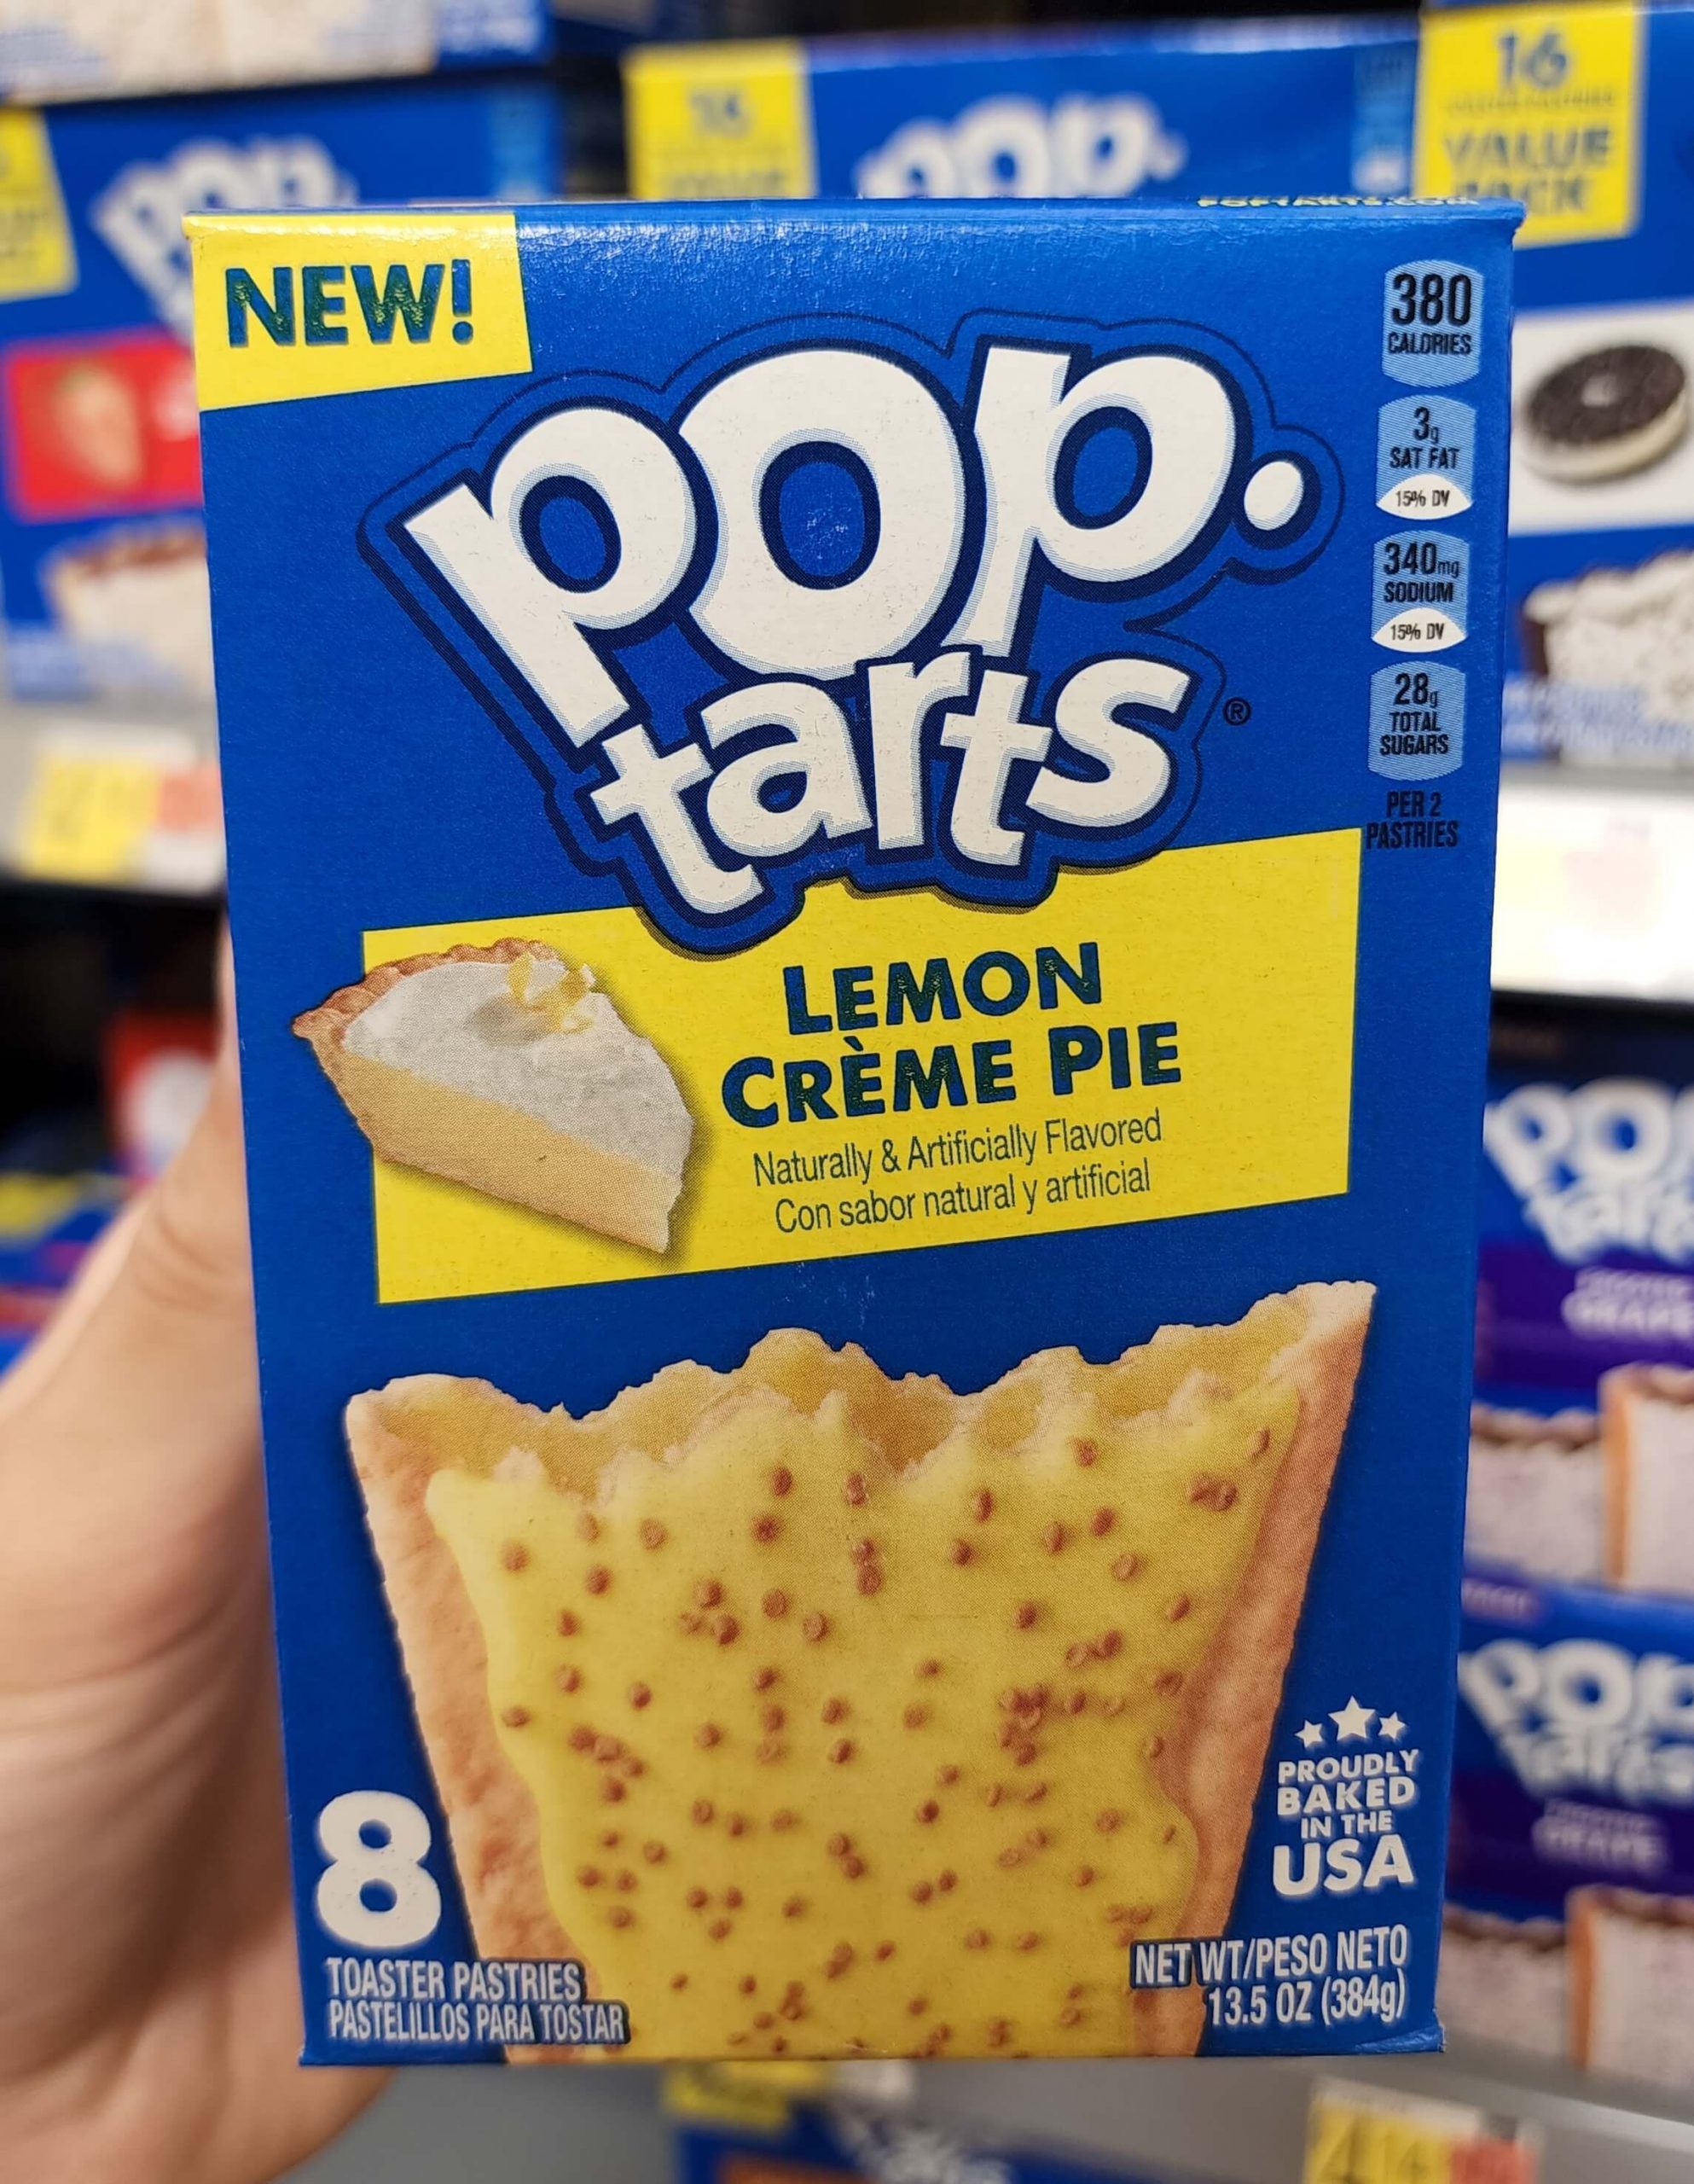 Pop-Tarts Has Three New Flavors That Have Us Drooling for Summer Pastries